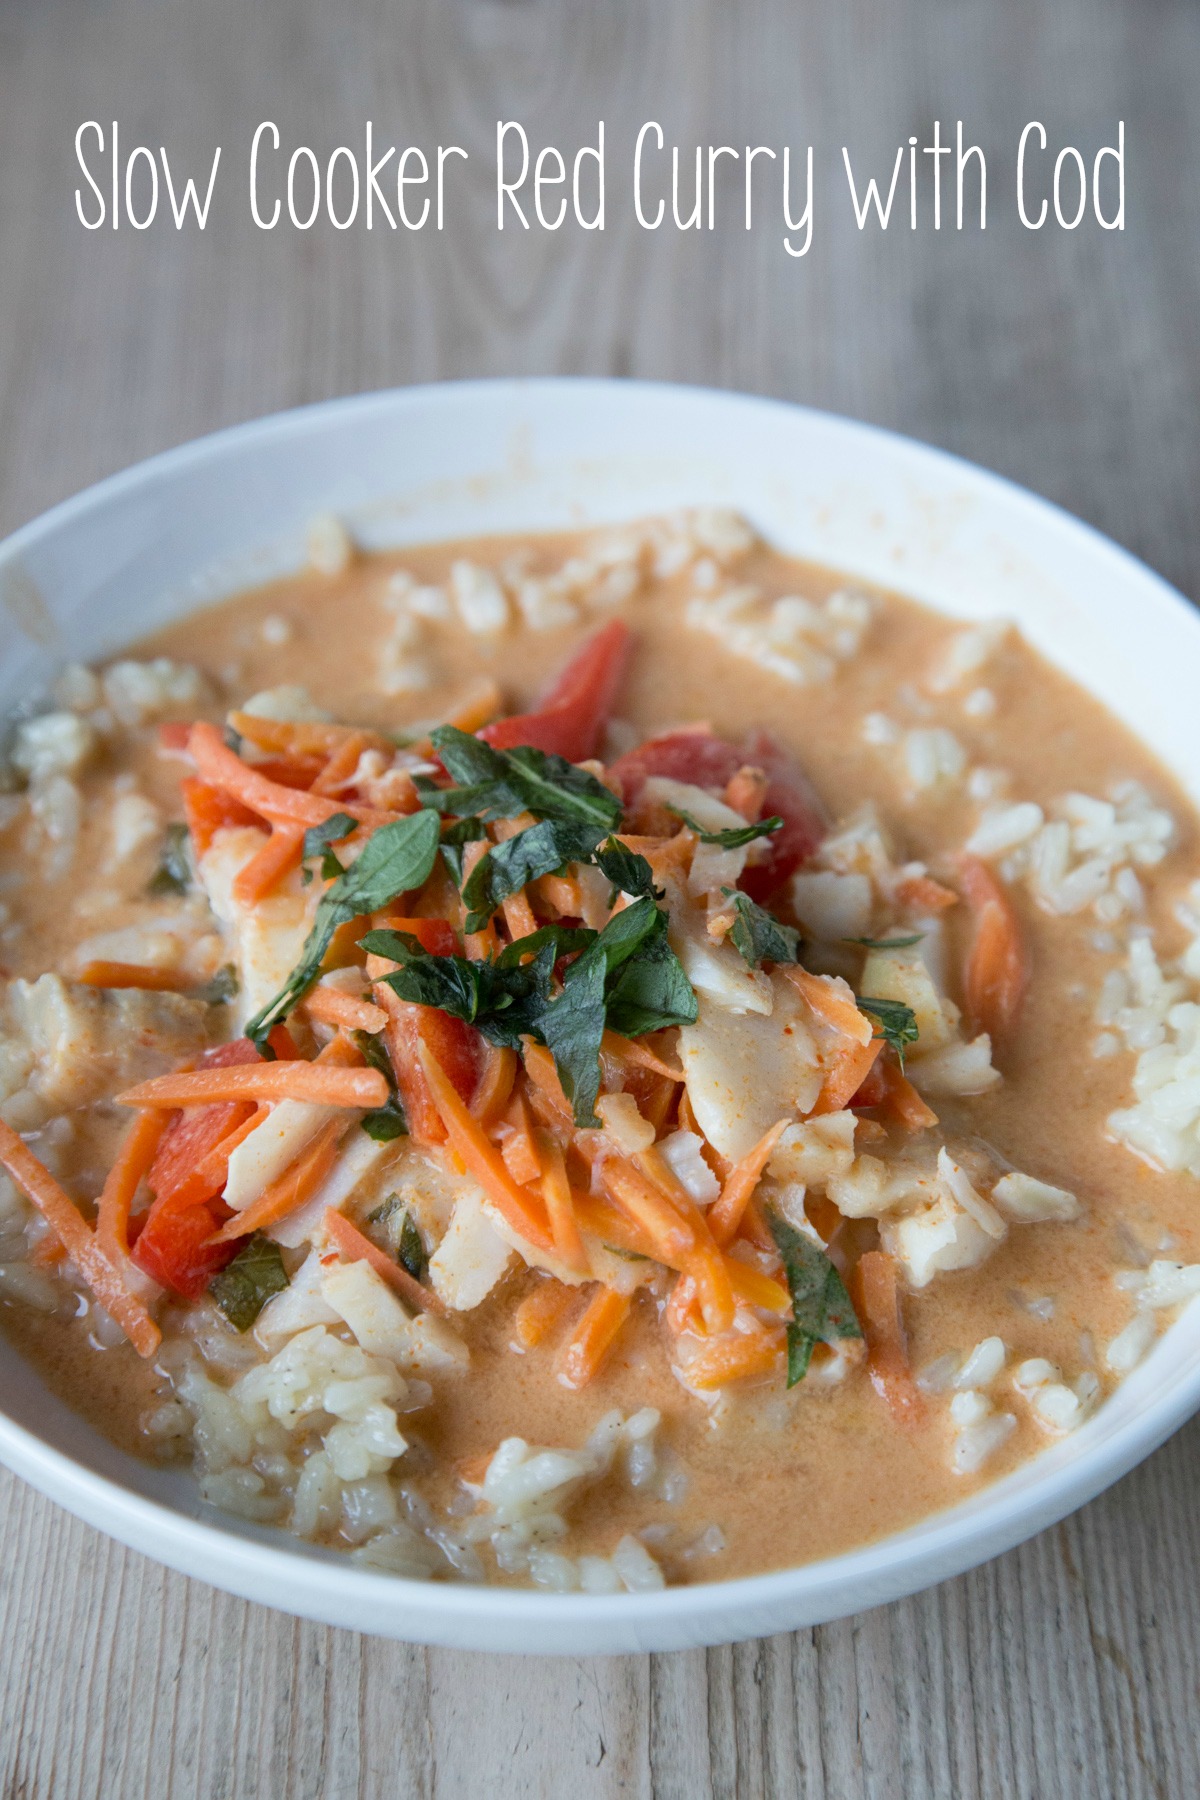 Slow Cooker Red Curry with Cod on 5DollarDinners.com